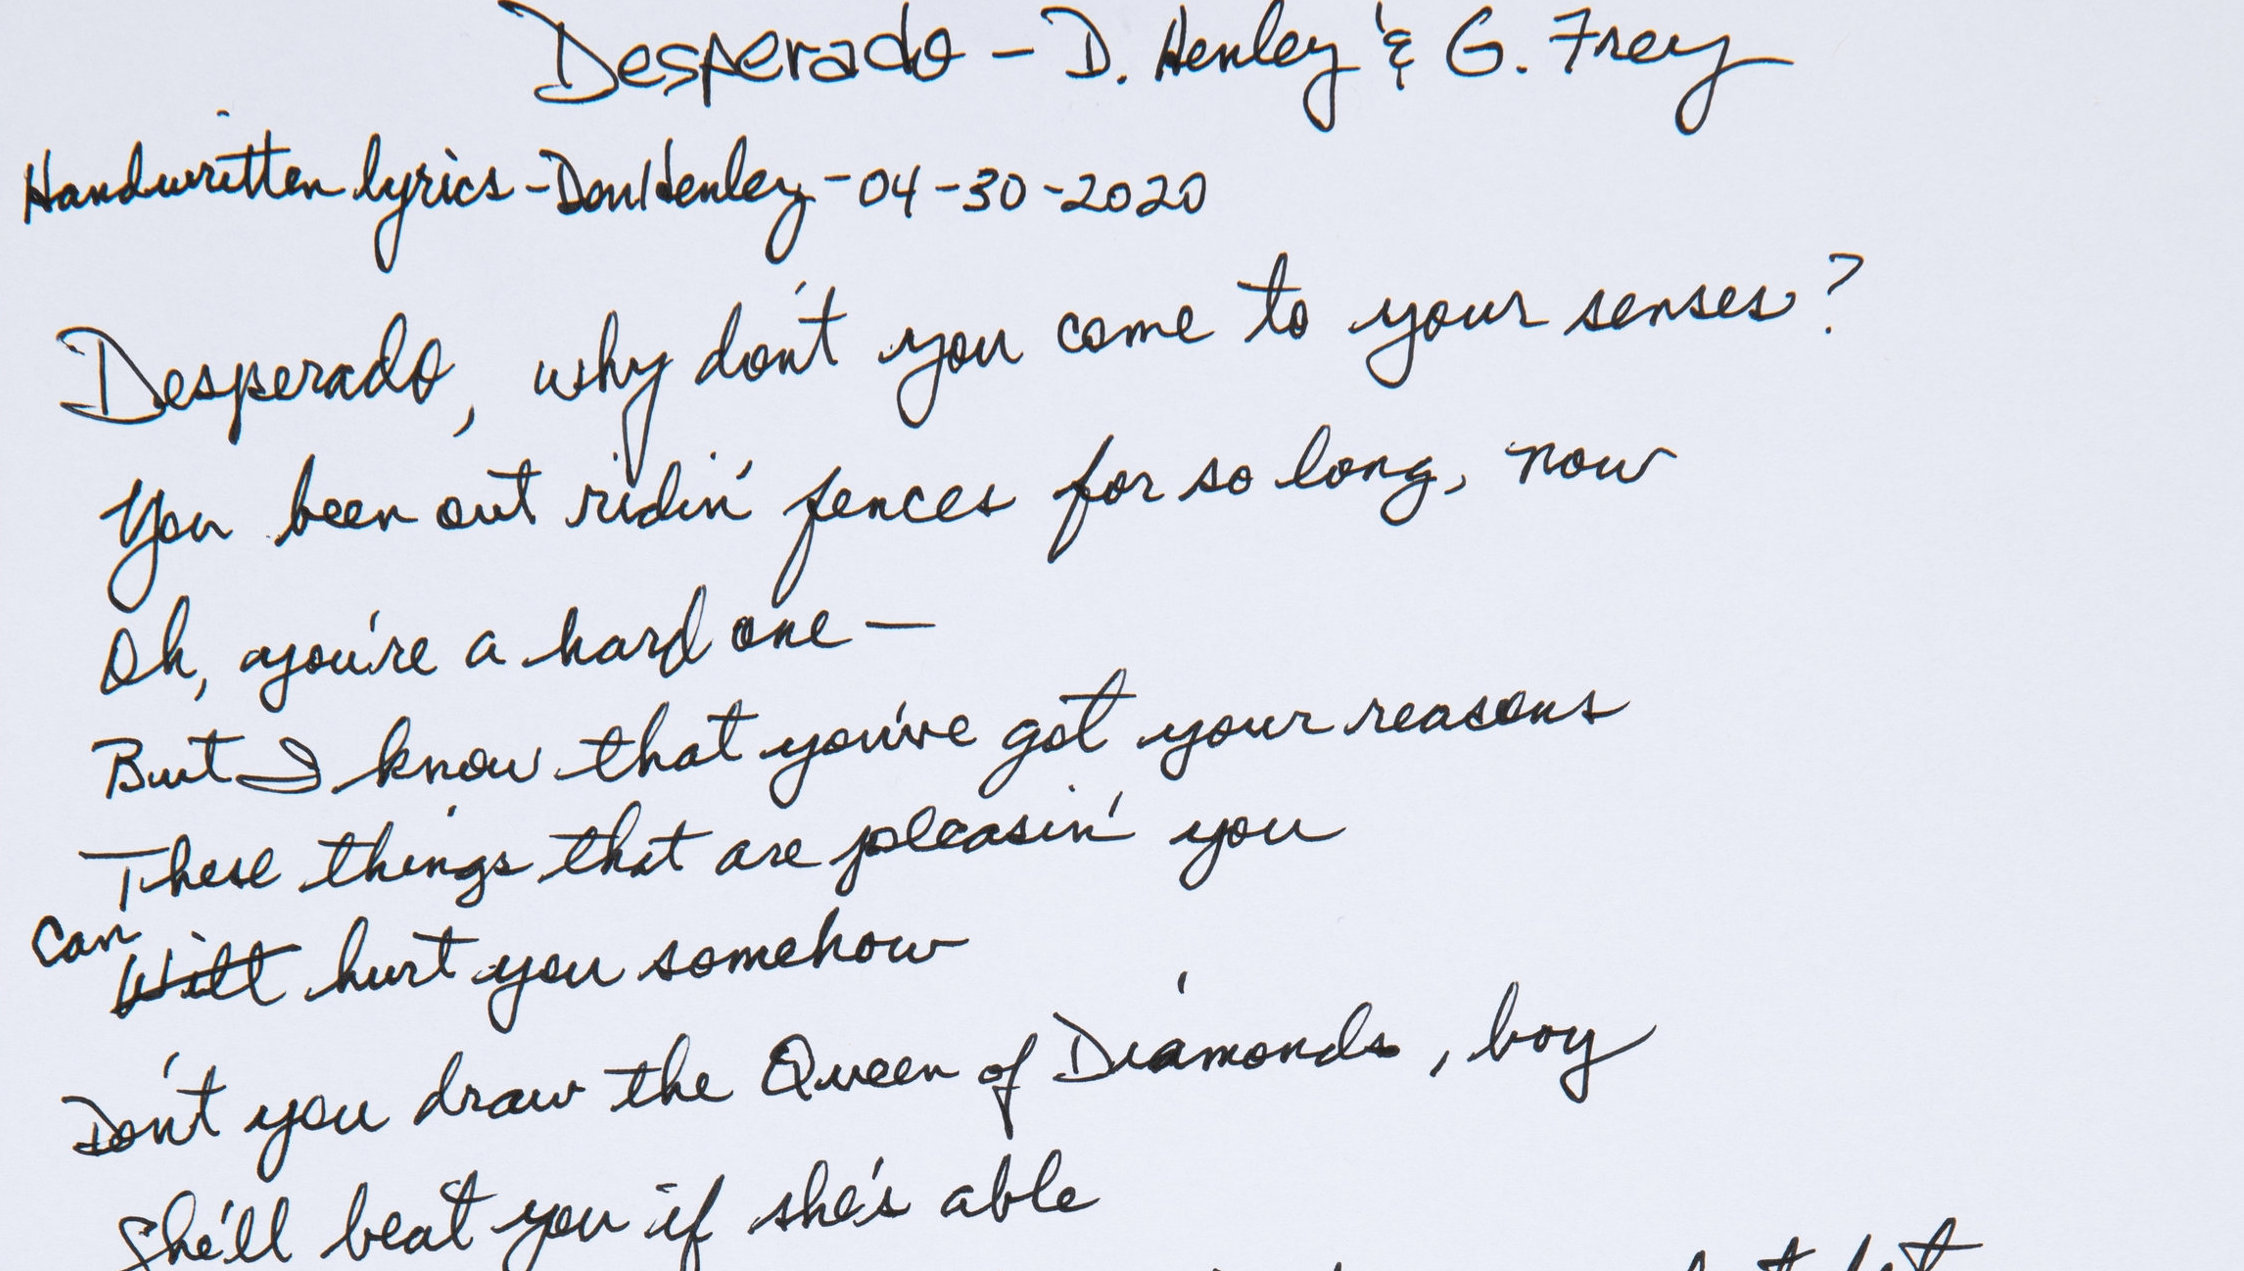 Don Henley jotted down the lyrics to 'Desperado' in April. They sold for  $33,000 this week